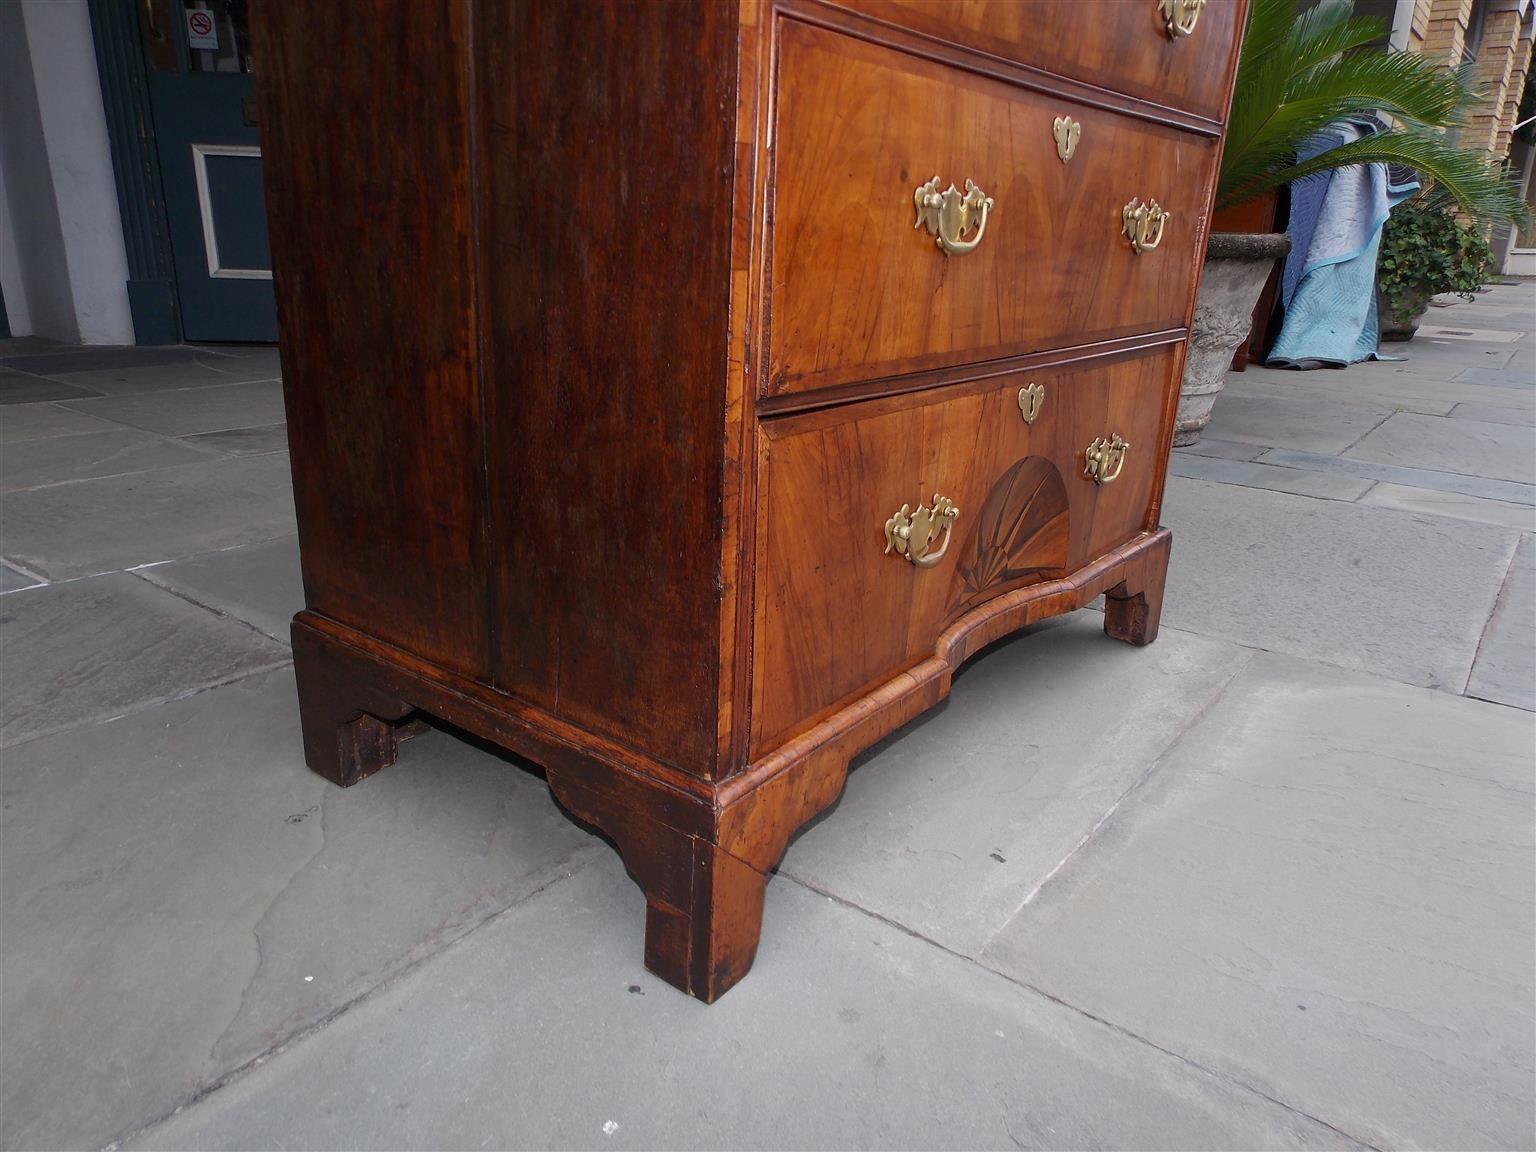 Mid-18th Century English Chippendale Walnut Chest with Ebony and Satinwood Inlaid Star, C. 1750